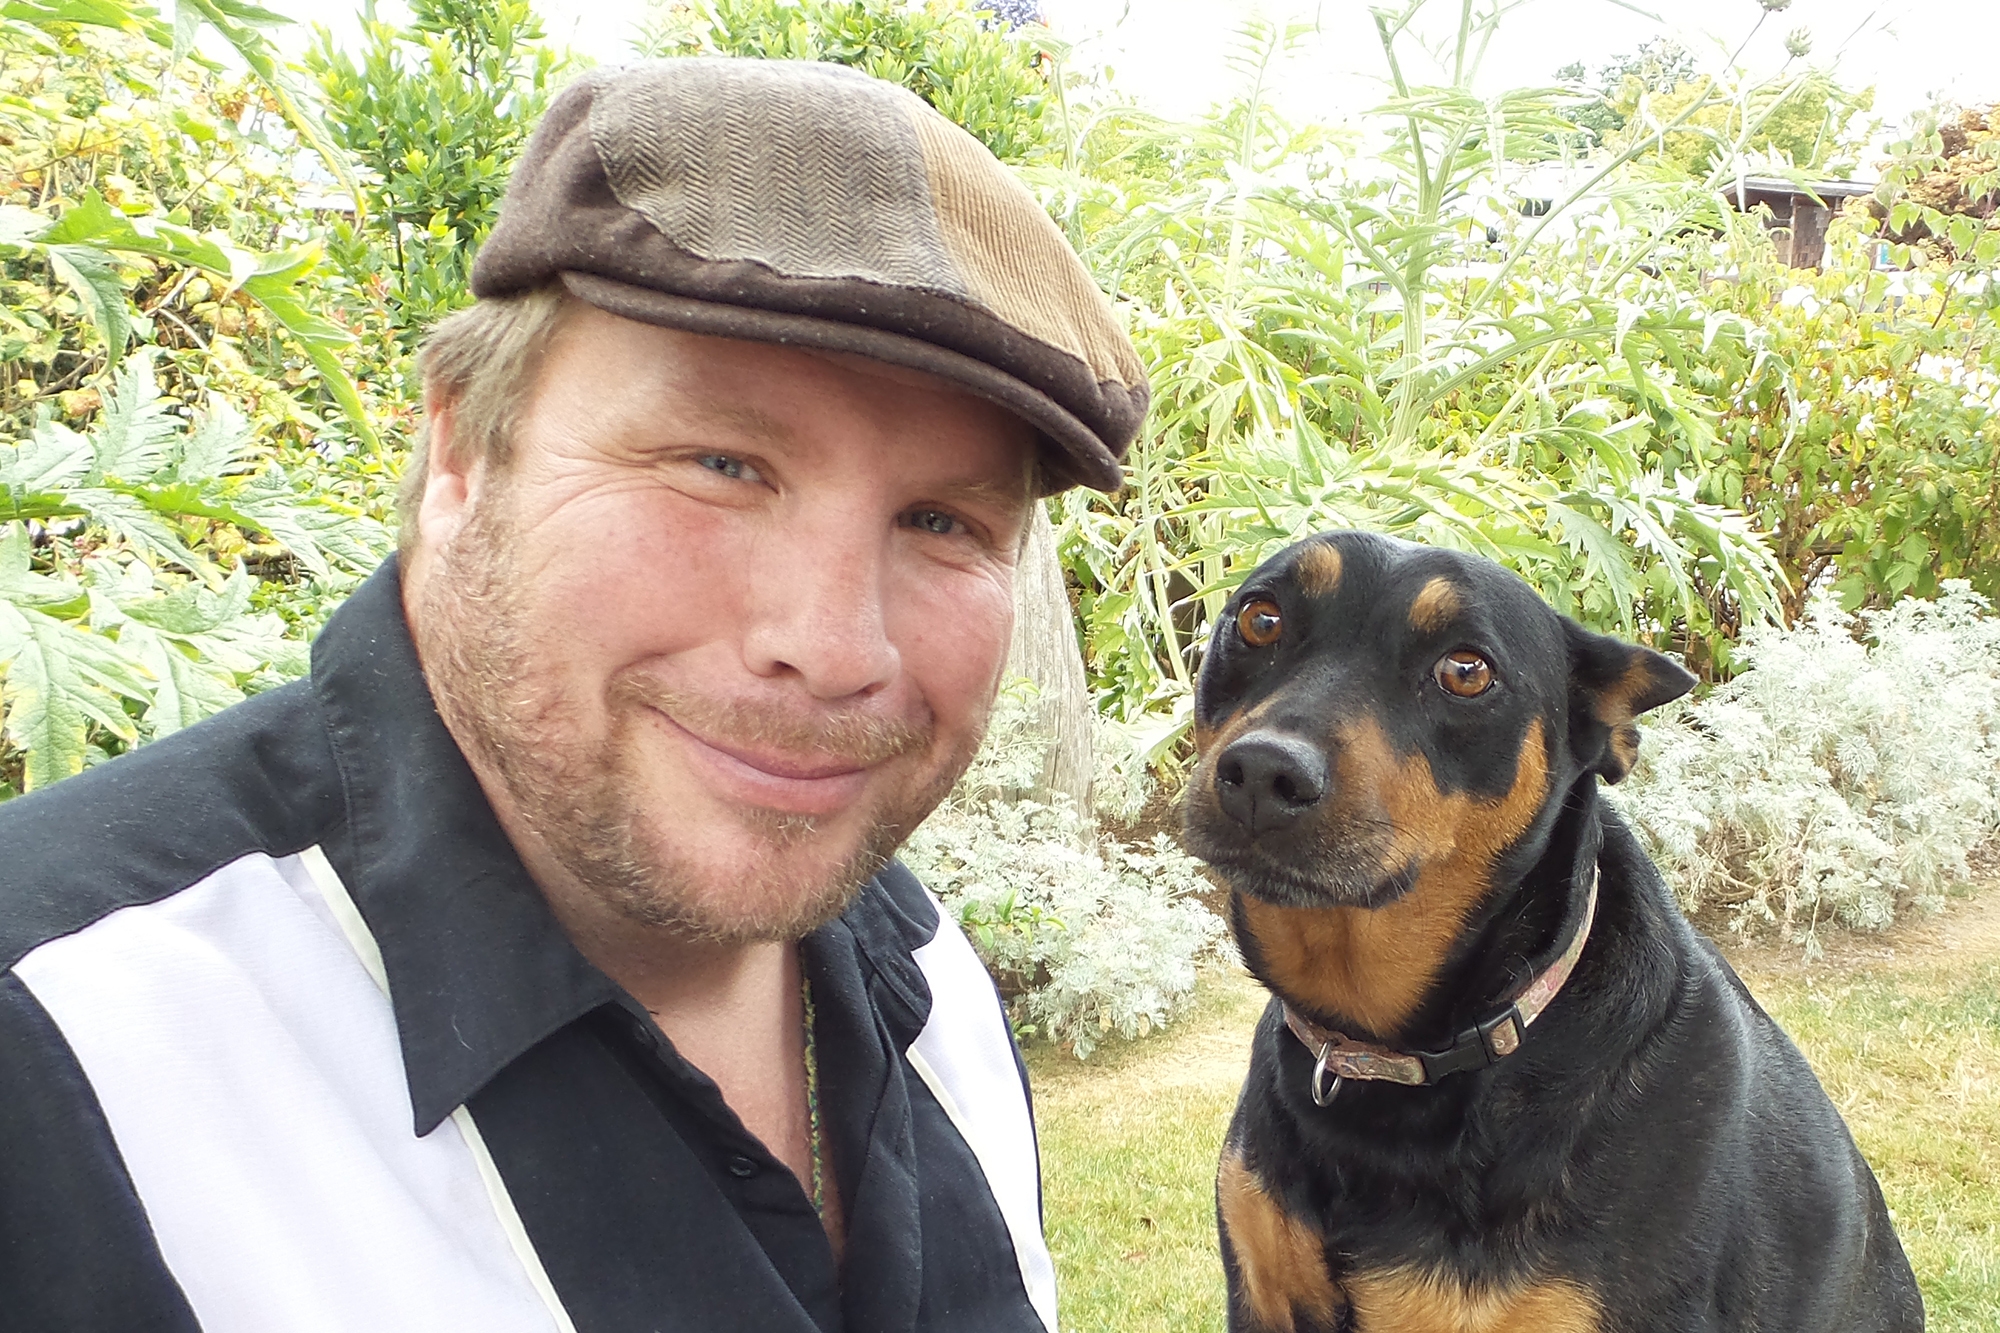 An Amazon author in a cap in the woods with his brown and black dog.